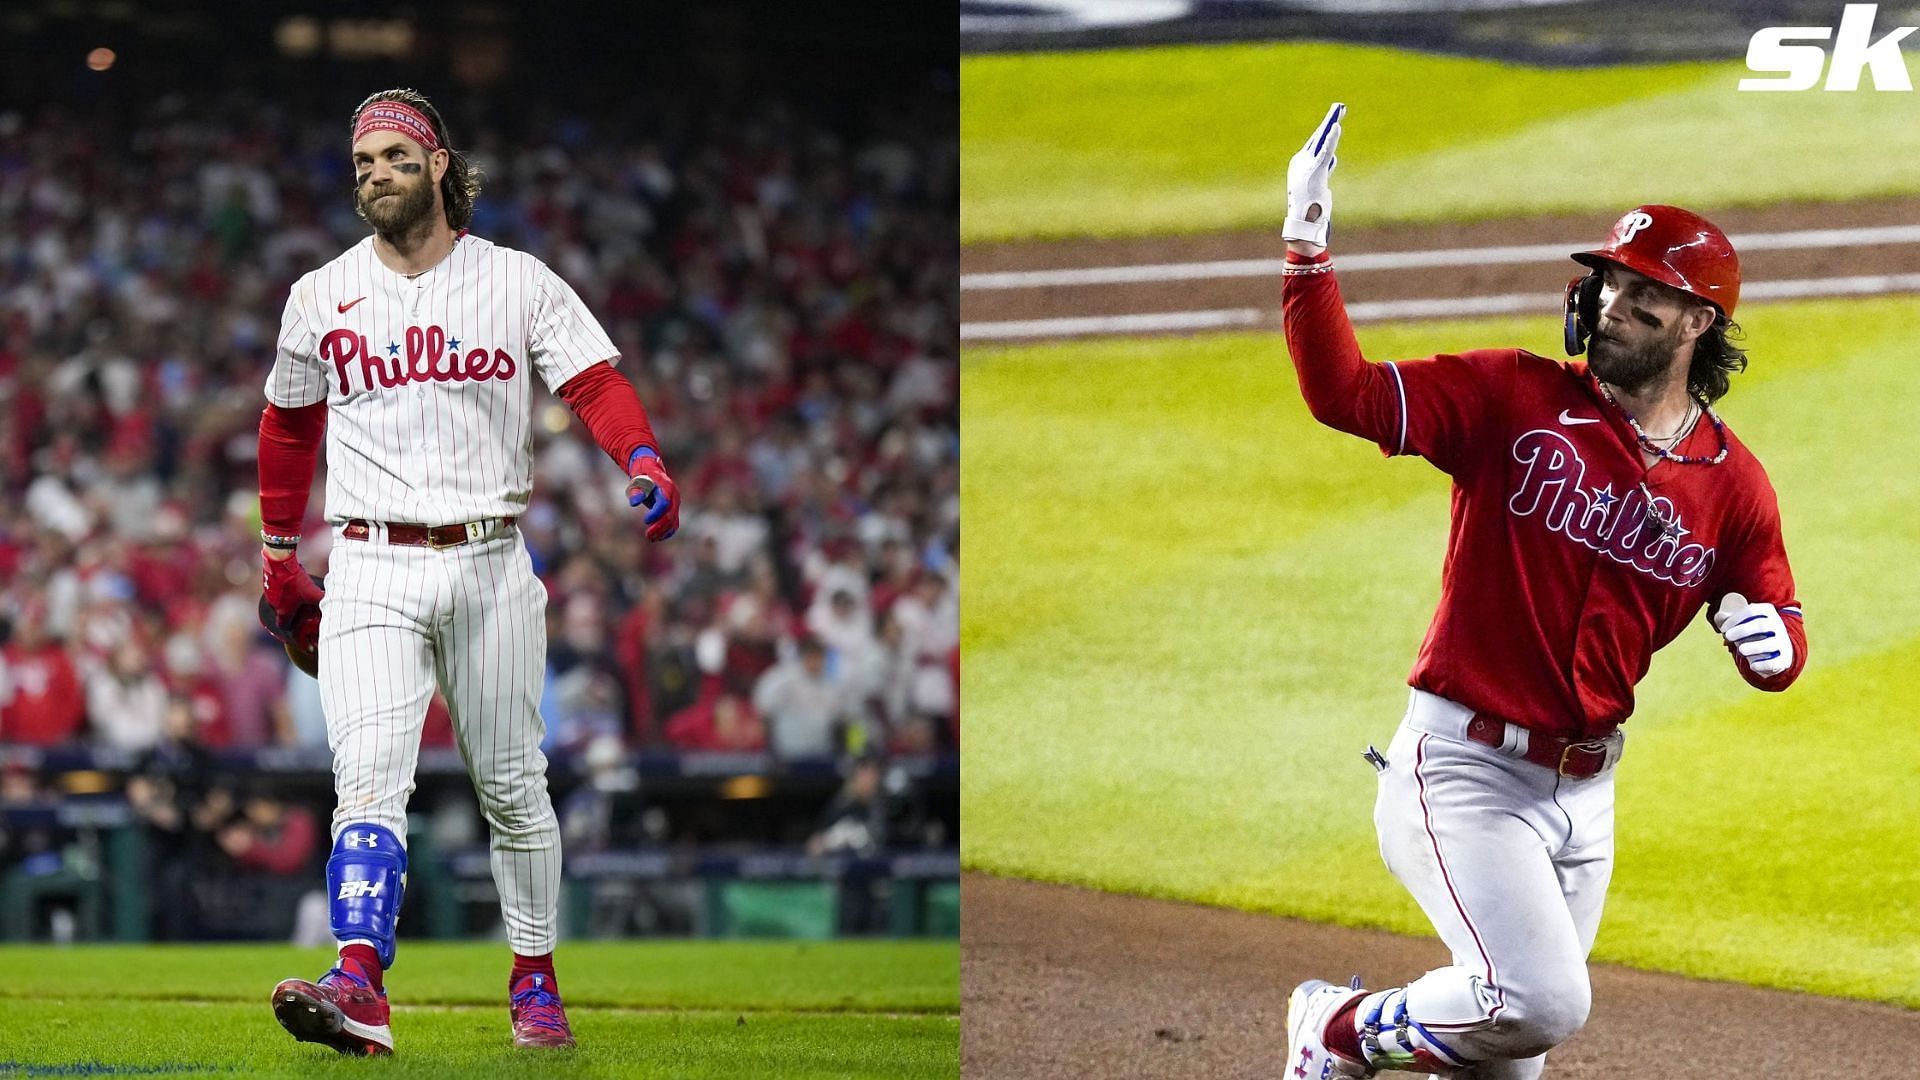 In Photos: Bryce Harper turns heads at Game 7 by wearing Patrick Beverley